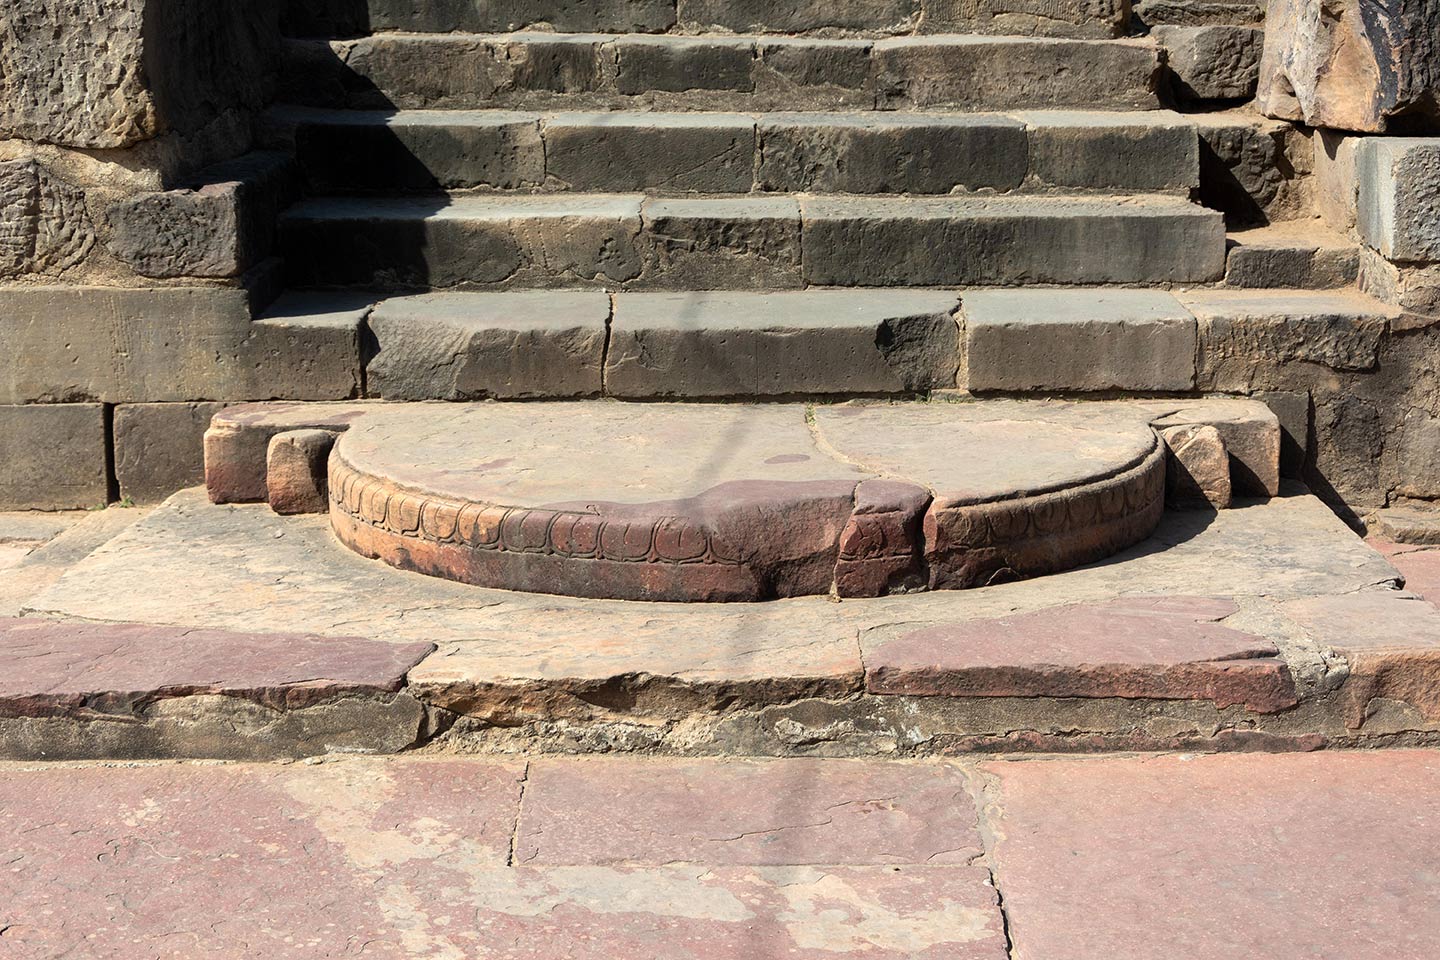 The east-facing steps on the adhisthana have a chandrashila (moonstone) on the third step. The chandrashila (moonstone) is a hemispherical stone in the shape of the moon and is often placed at the entrance of Hindu temples and is designed to resemble a lotus flower.